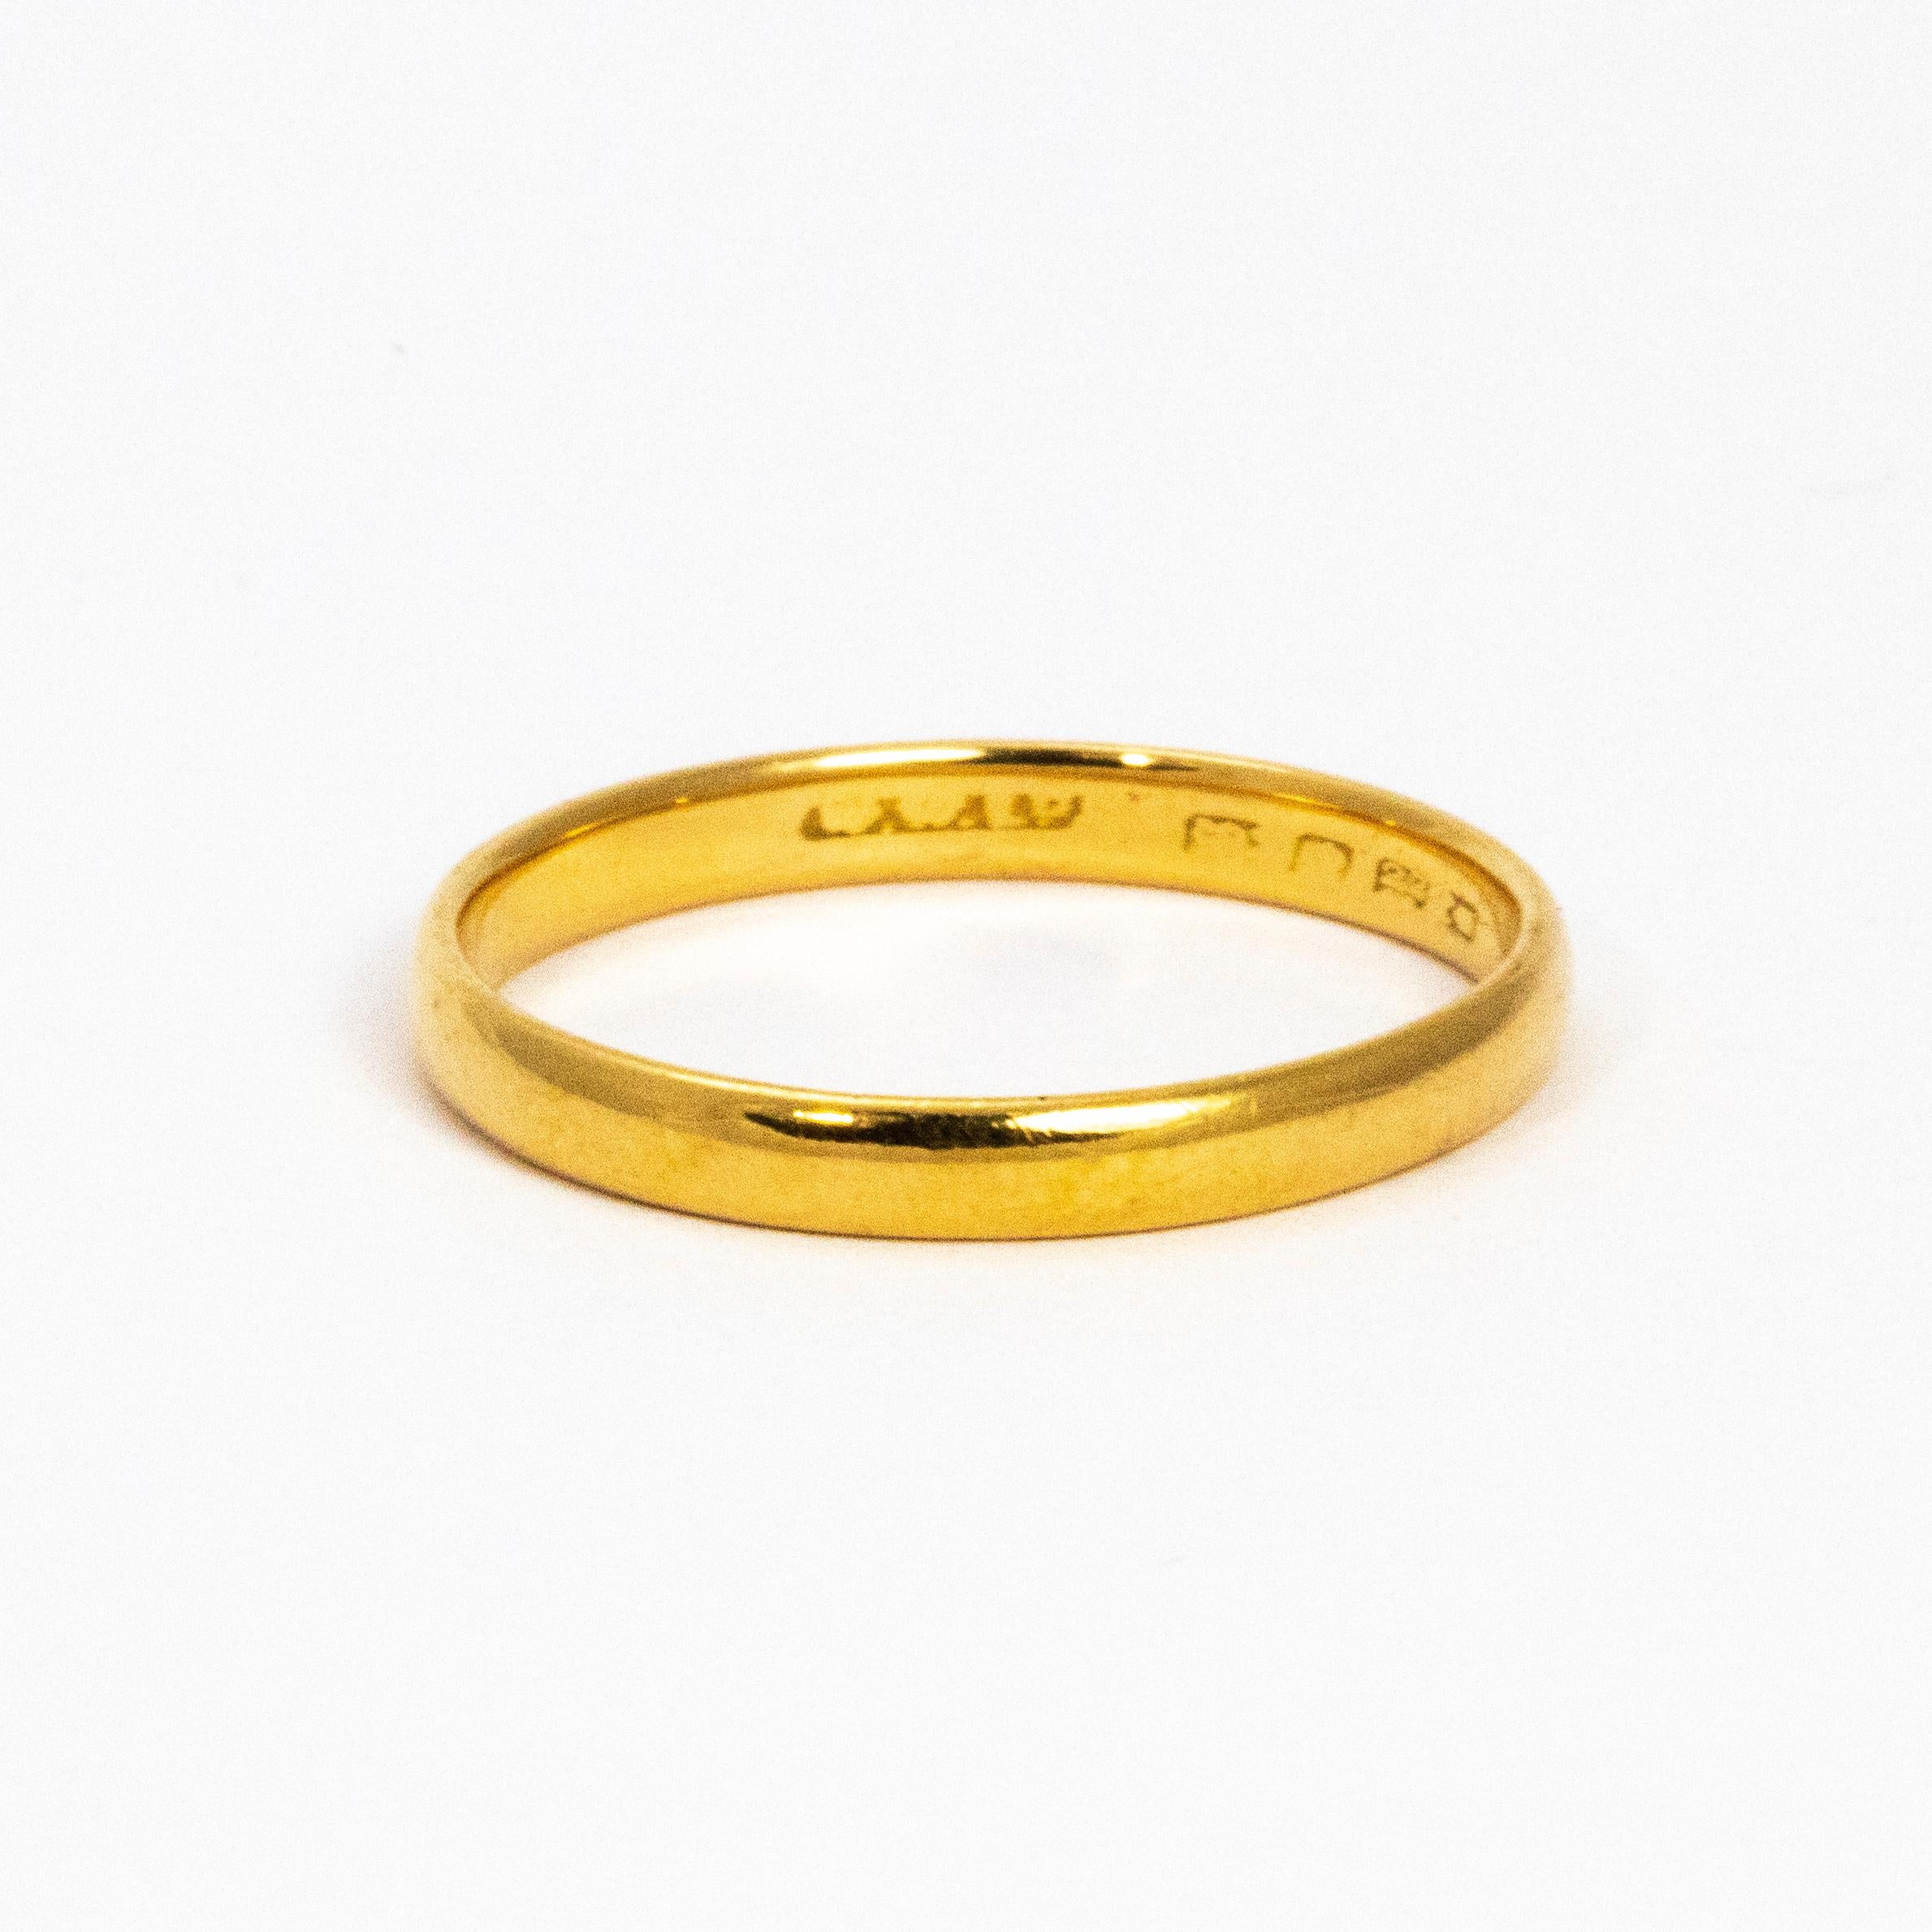 Never going out of fashion, this classic 22ct gold band measures approx 2mm wide and would make a perfect wedding band or a simple everyday ring.

Ring Size: N or 6 3/4
